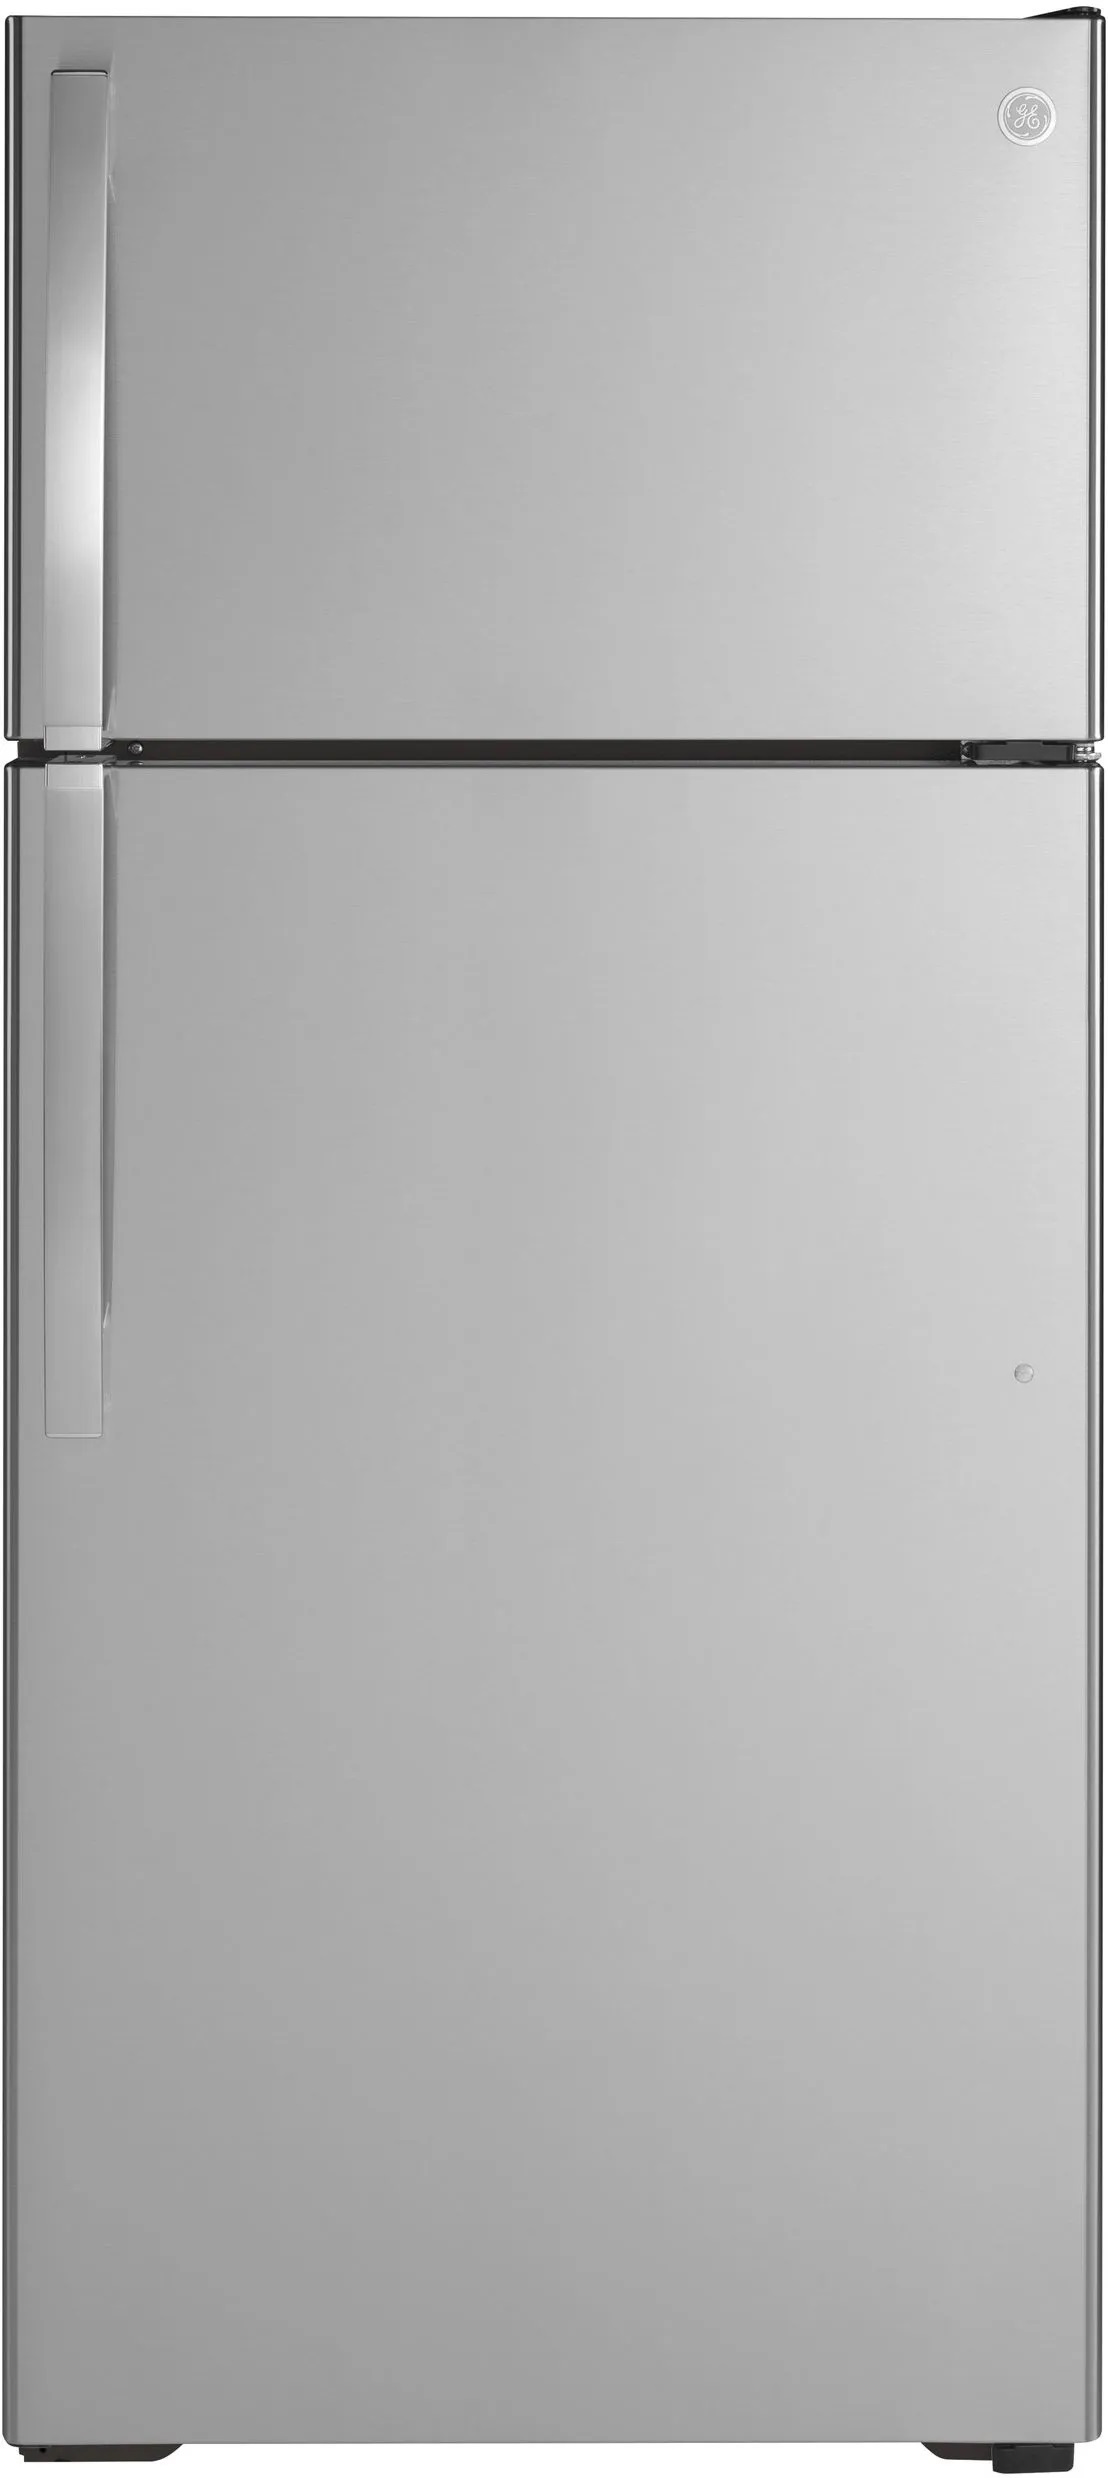 Front view of GE GIE17GSNRSS top freezer refrigerator with ice maker